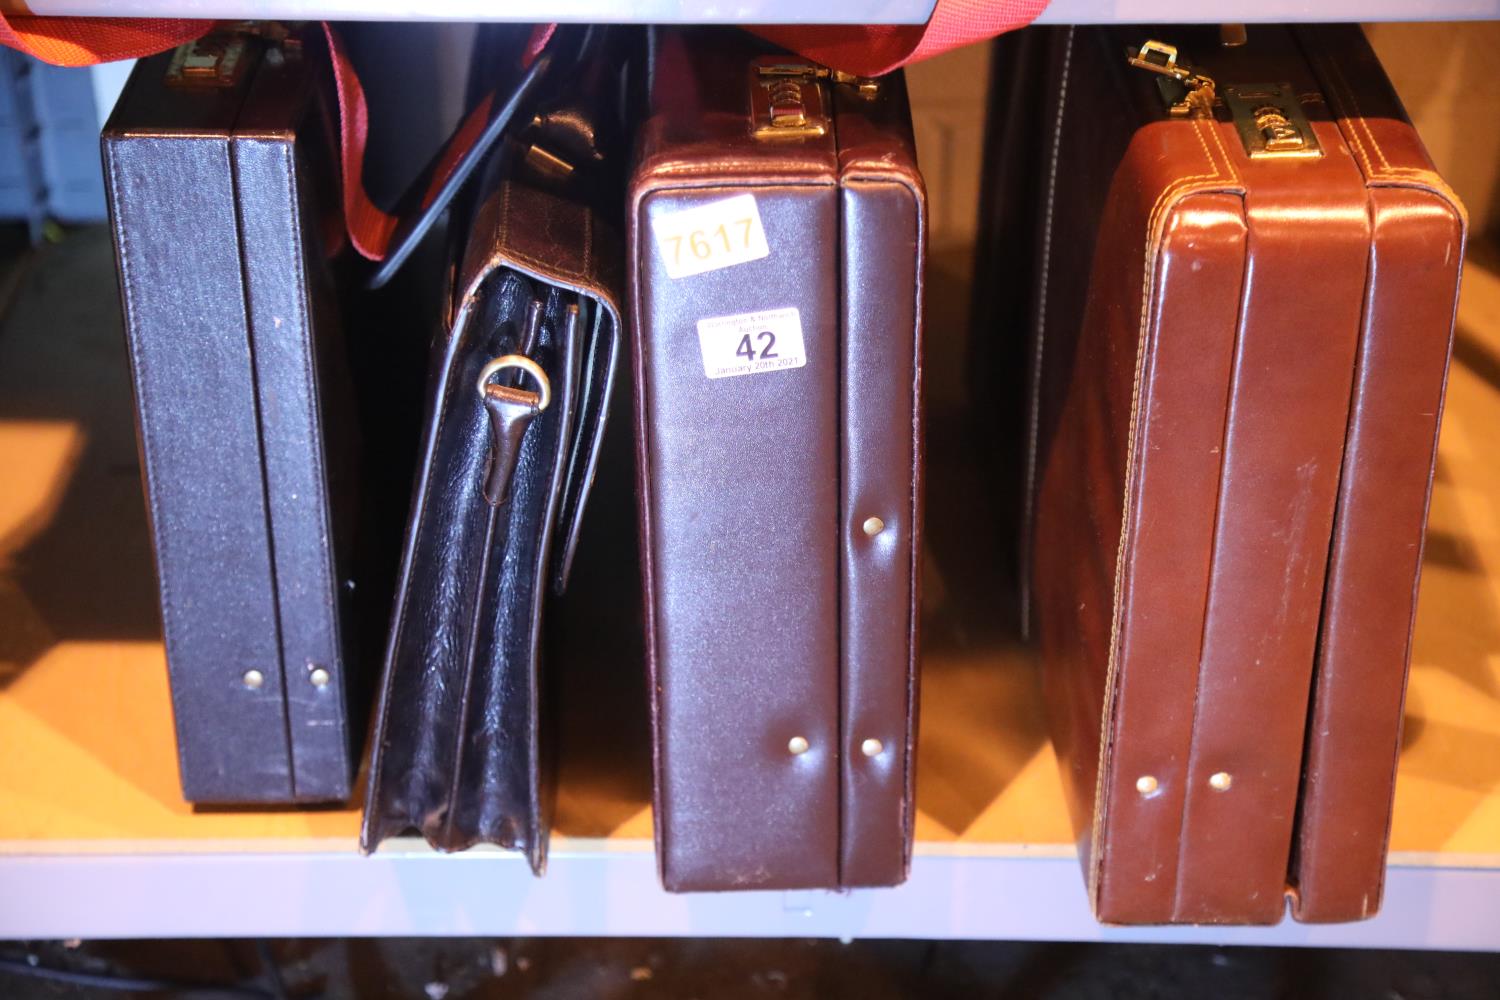 Four briefcases including Antler. Not available for in-house P&P, contact Paul O'Hea at Mailboxes on